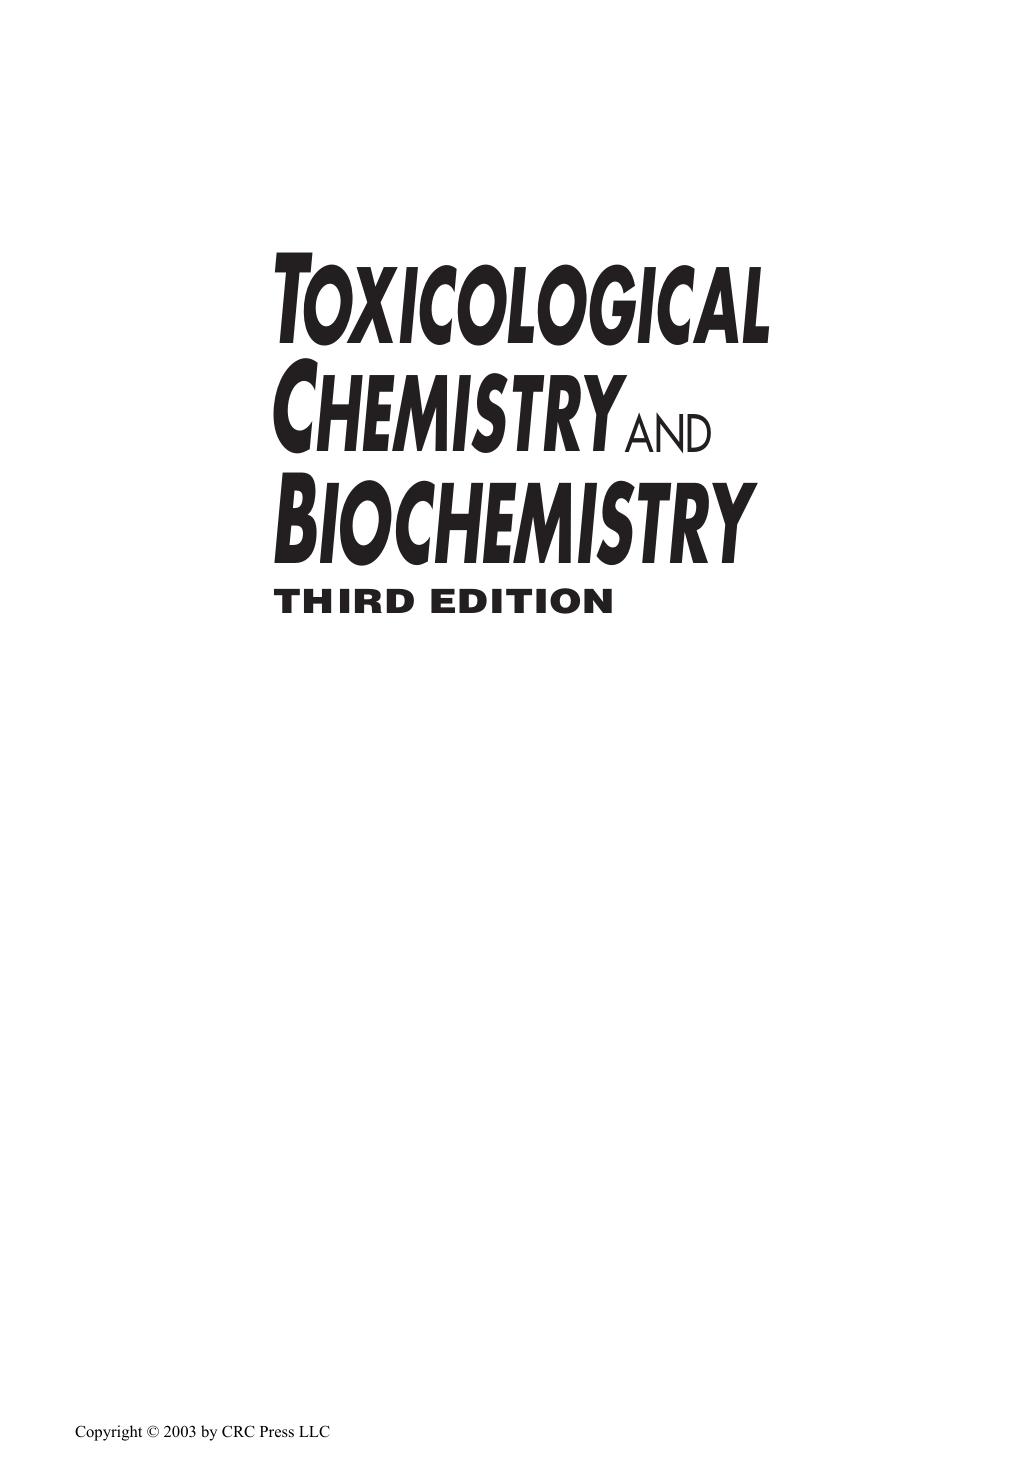 TOXICOLOGICAL CHEMISTRY AND BIOCHEMISTRY - THIRD EDITION